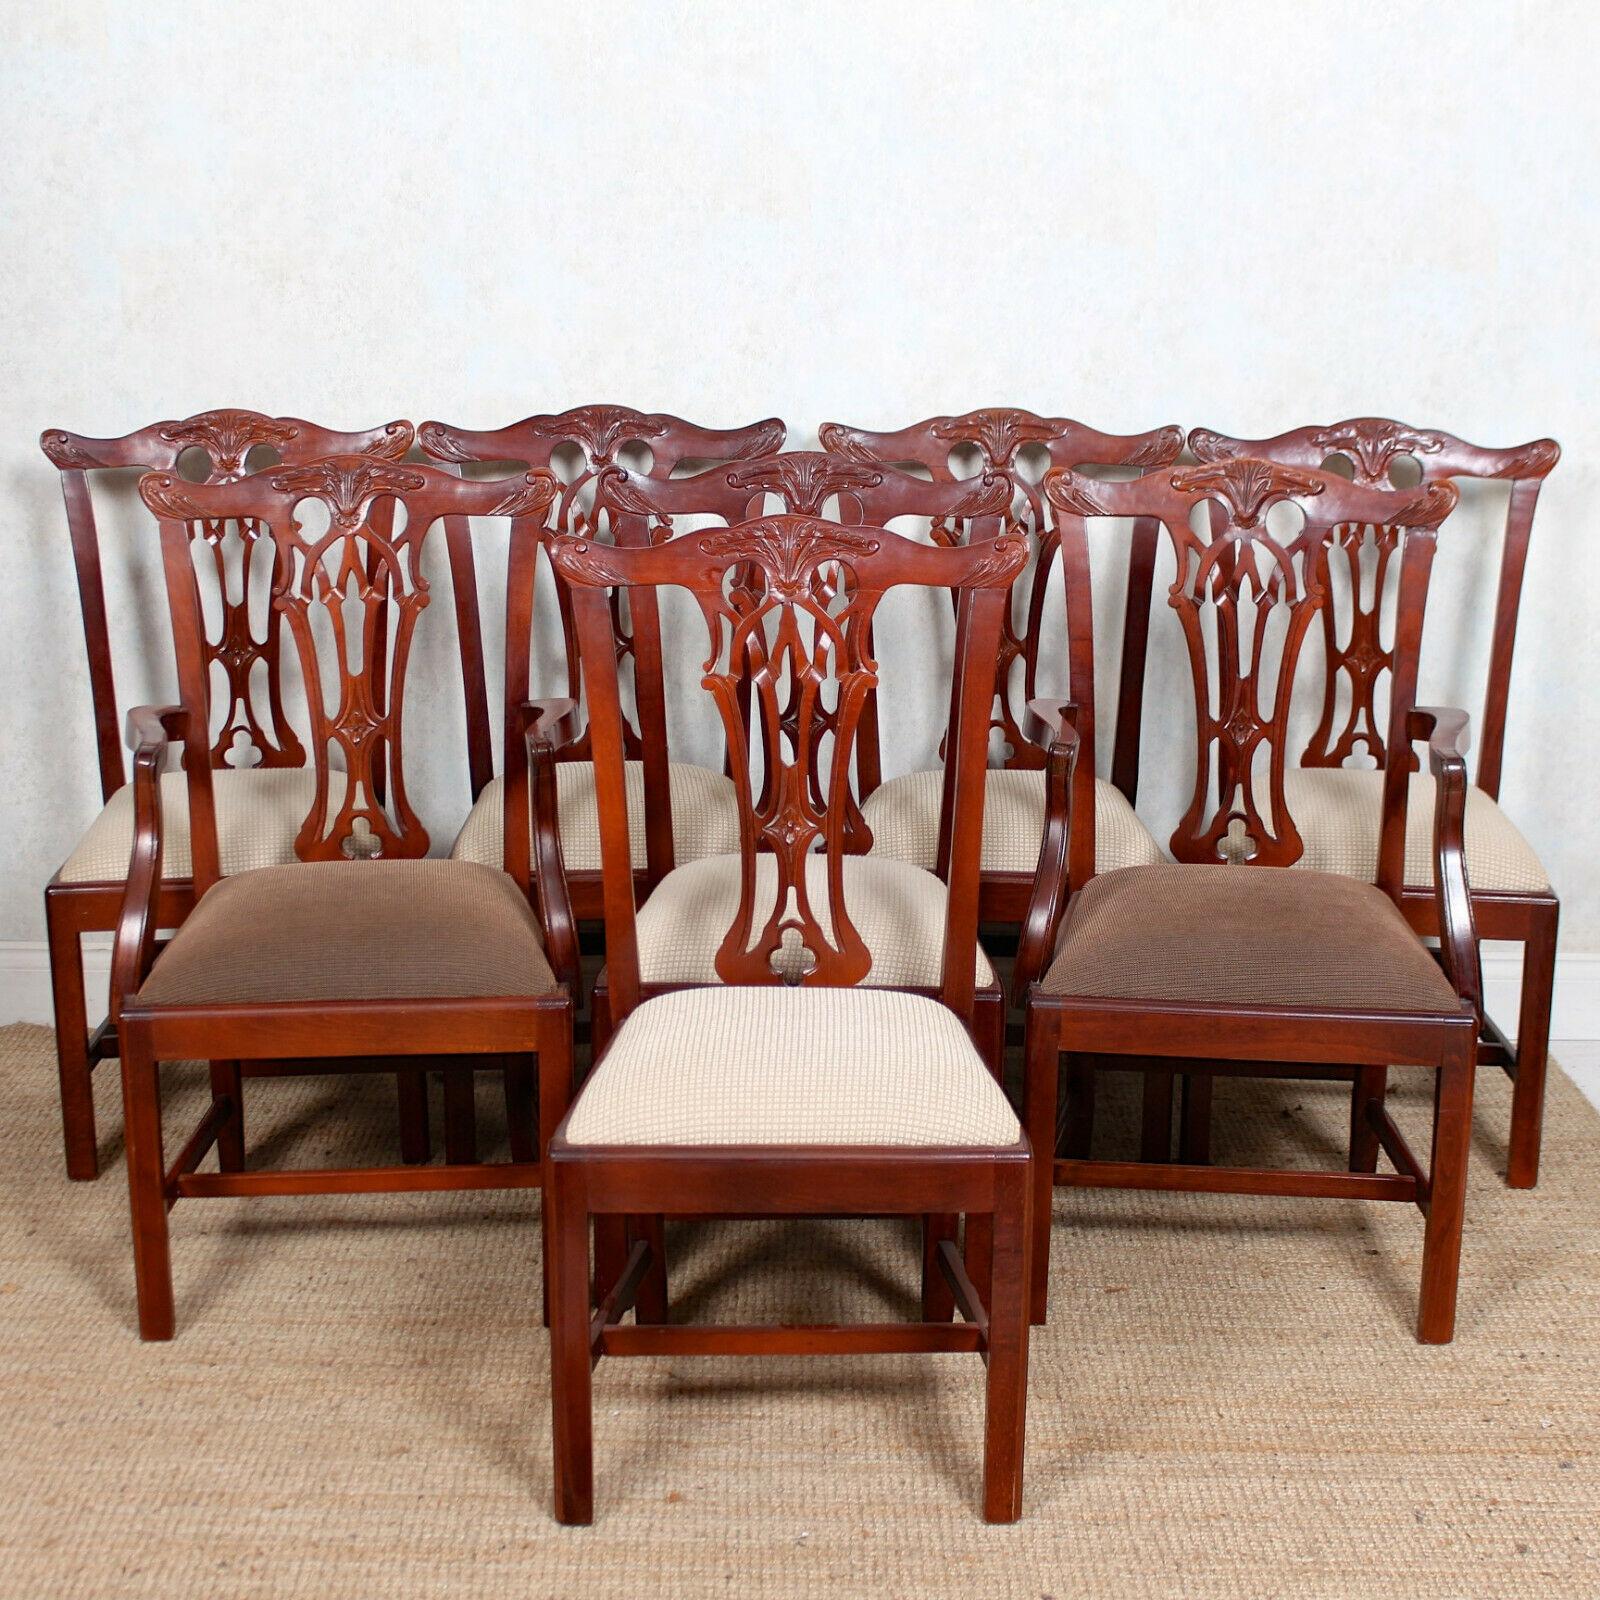 20th Century English Mahogany Dining Table and 8 Chairs Hepplewhite Stalker Antique Vintage For Sale